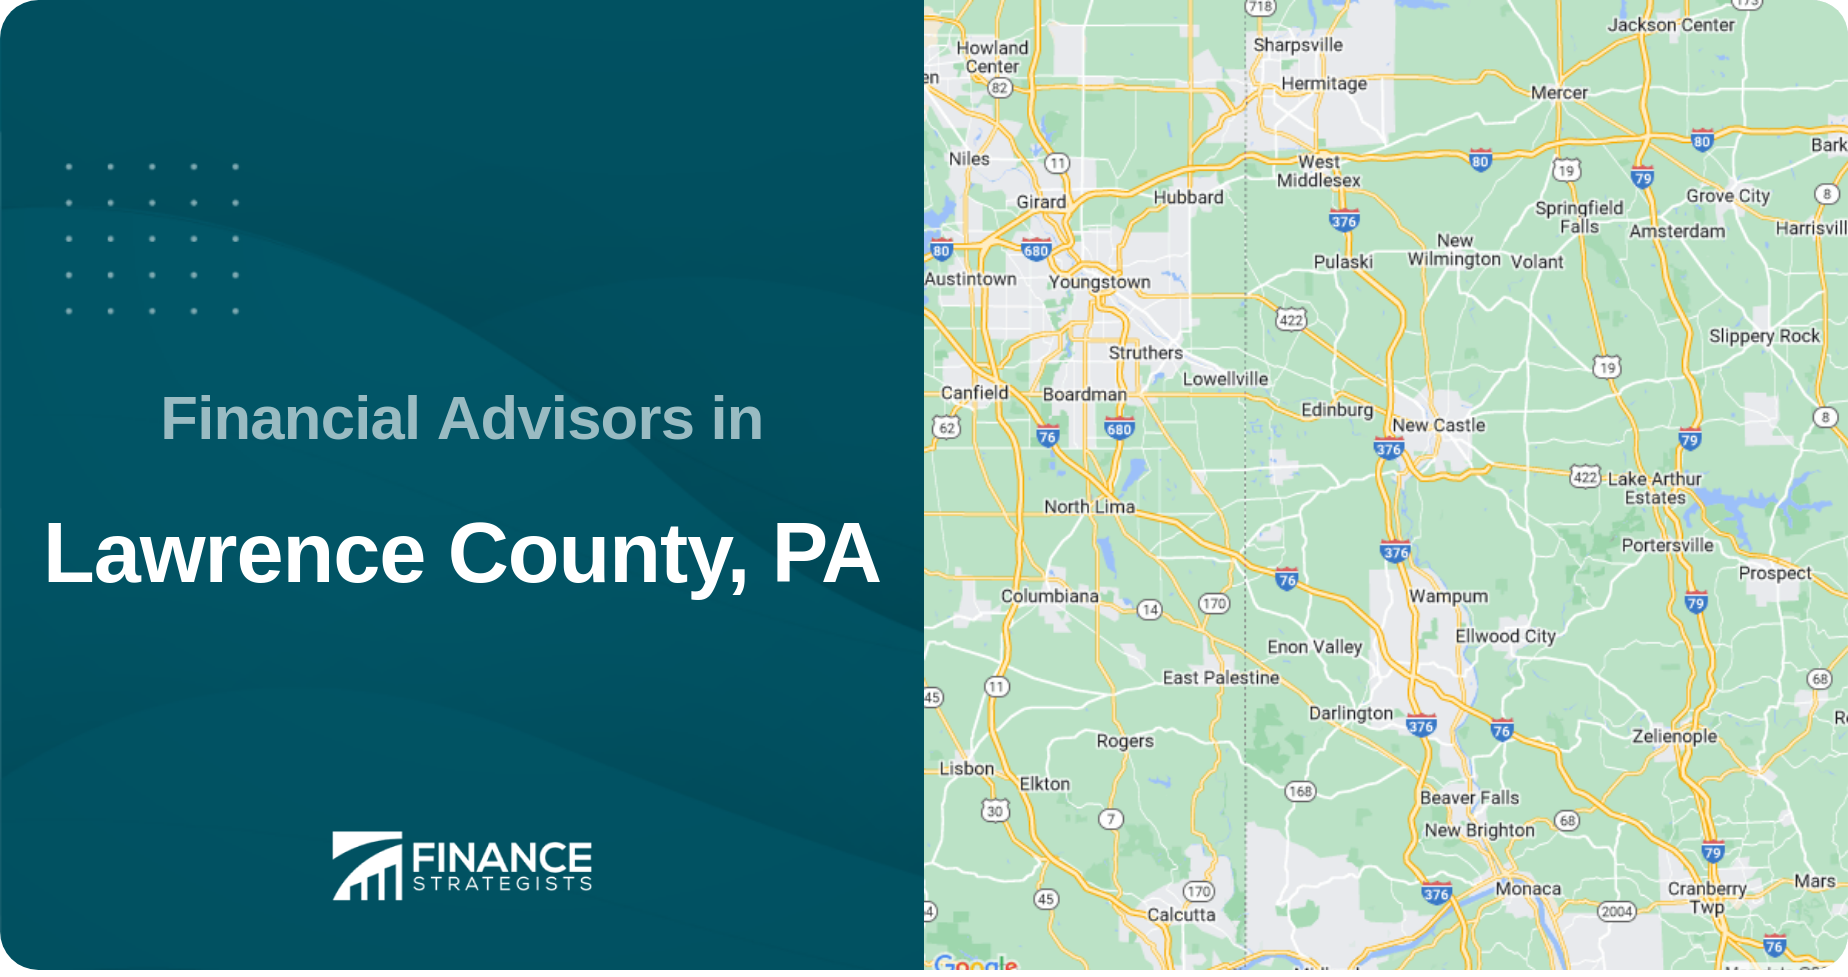 Financial Advisors in Lawrence County, PA